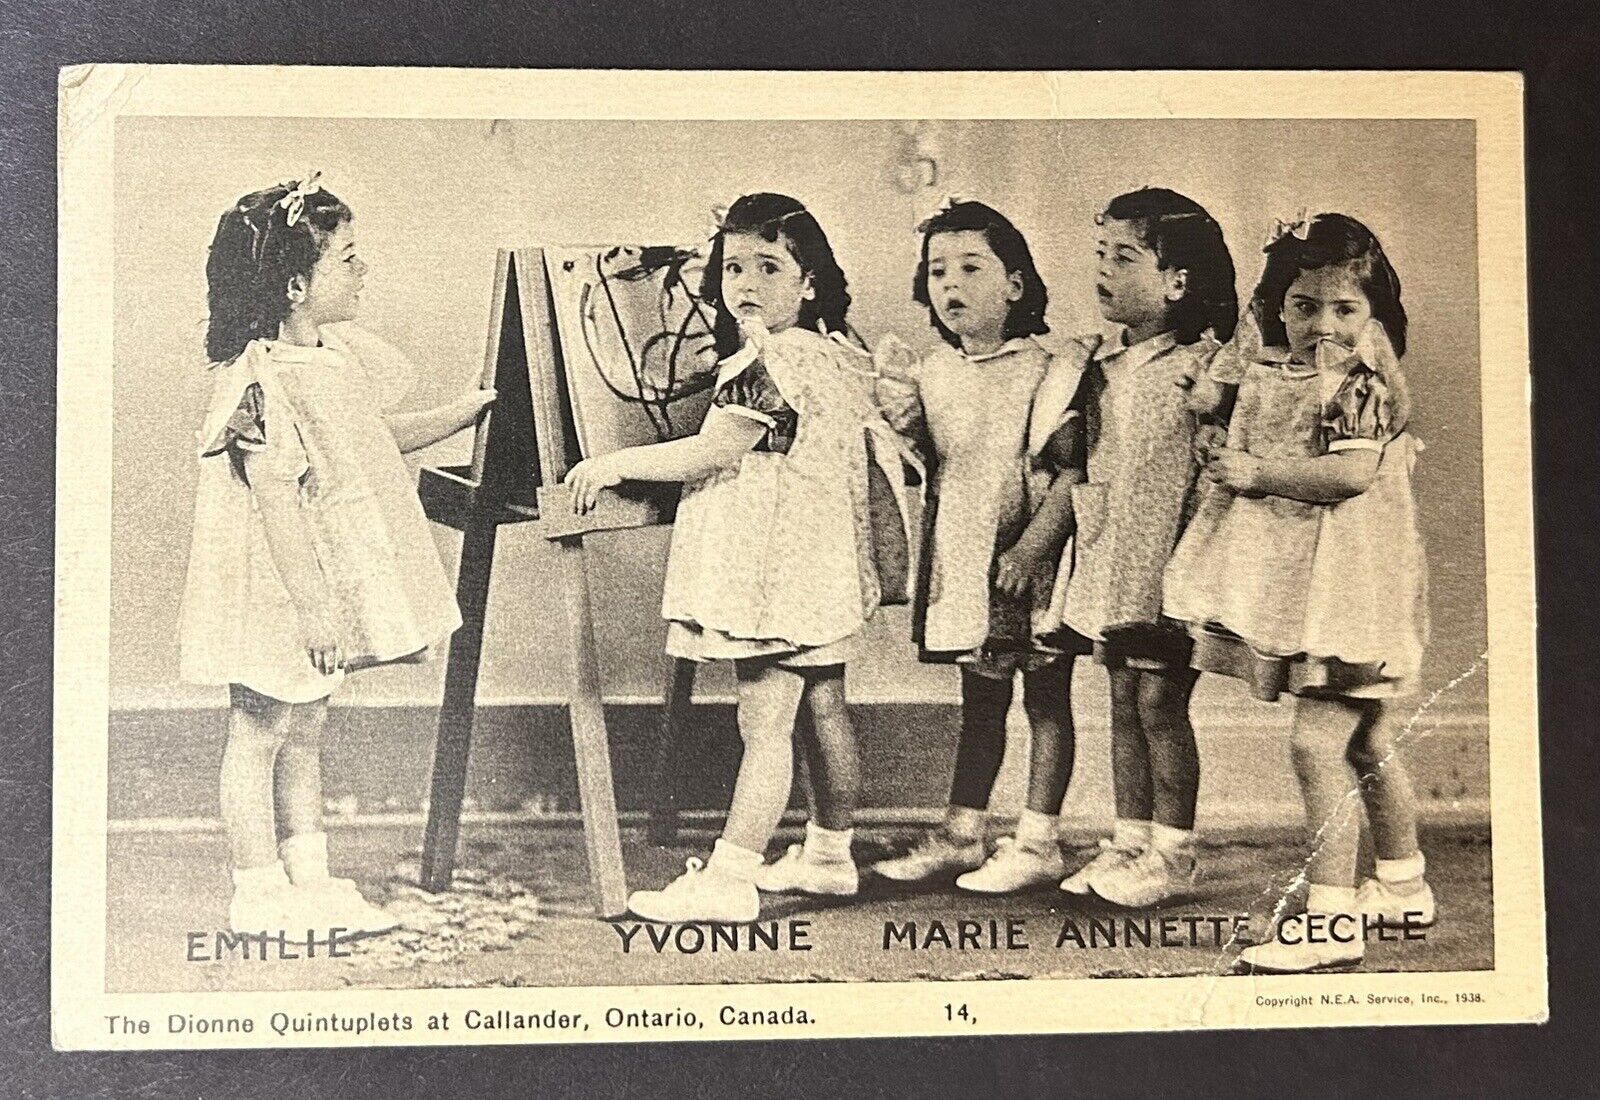 Dionne Quintuplets PECO # 14 Postcard, 2 Cent Stamp Intact, Midwife AUTOGRAPHED